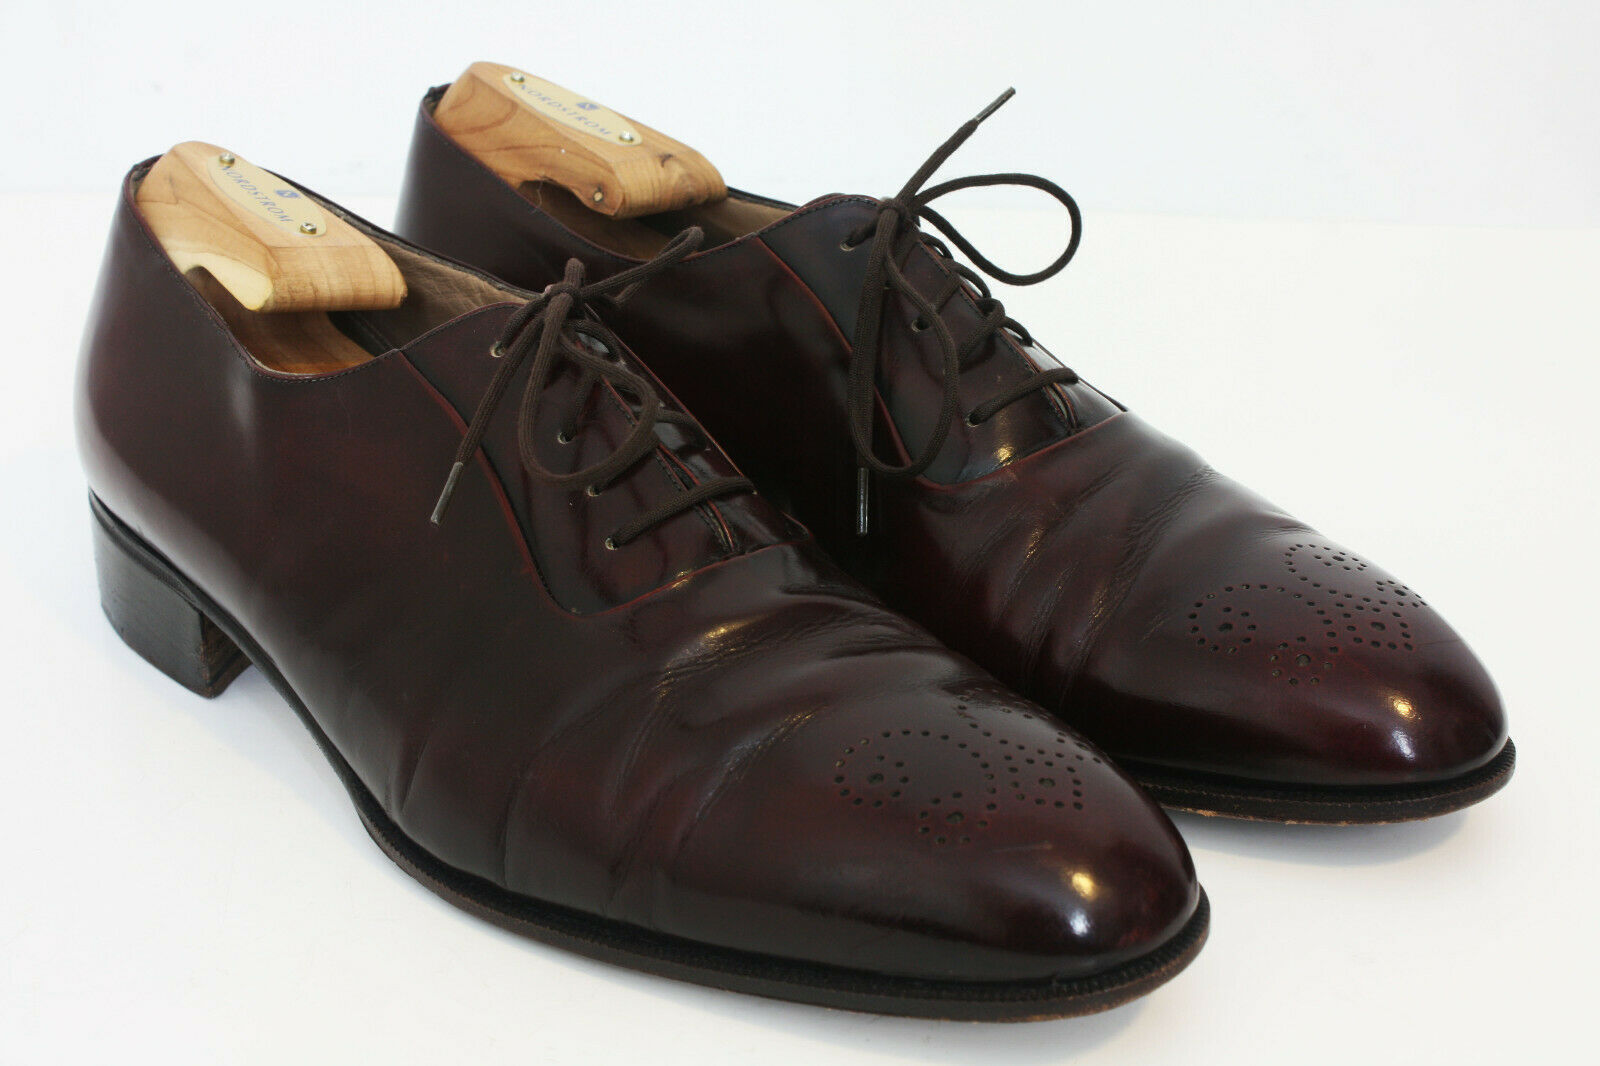 Bally "Bilbao" Oxford Dress Shoes Perf Toe Oxblood Vintage Made Italy Men's 10